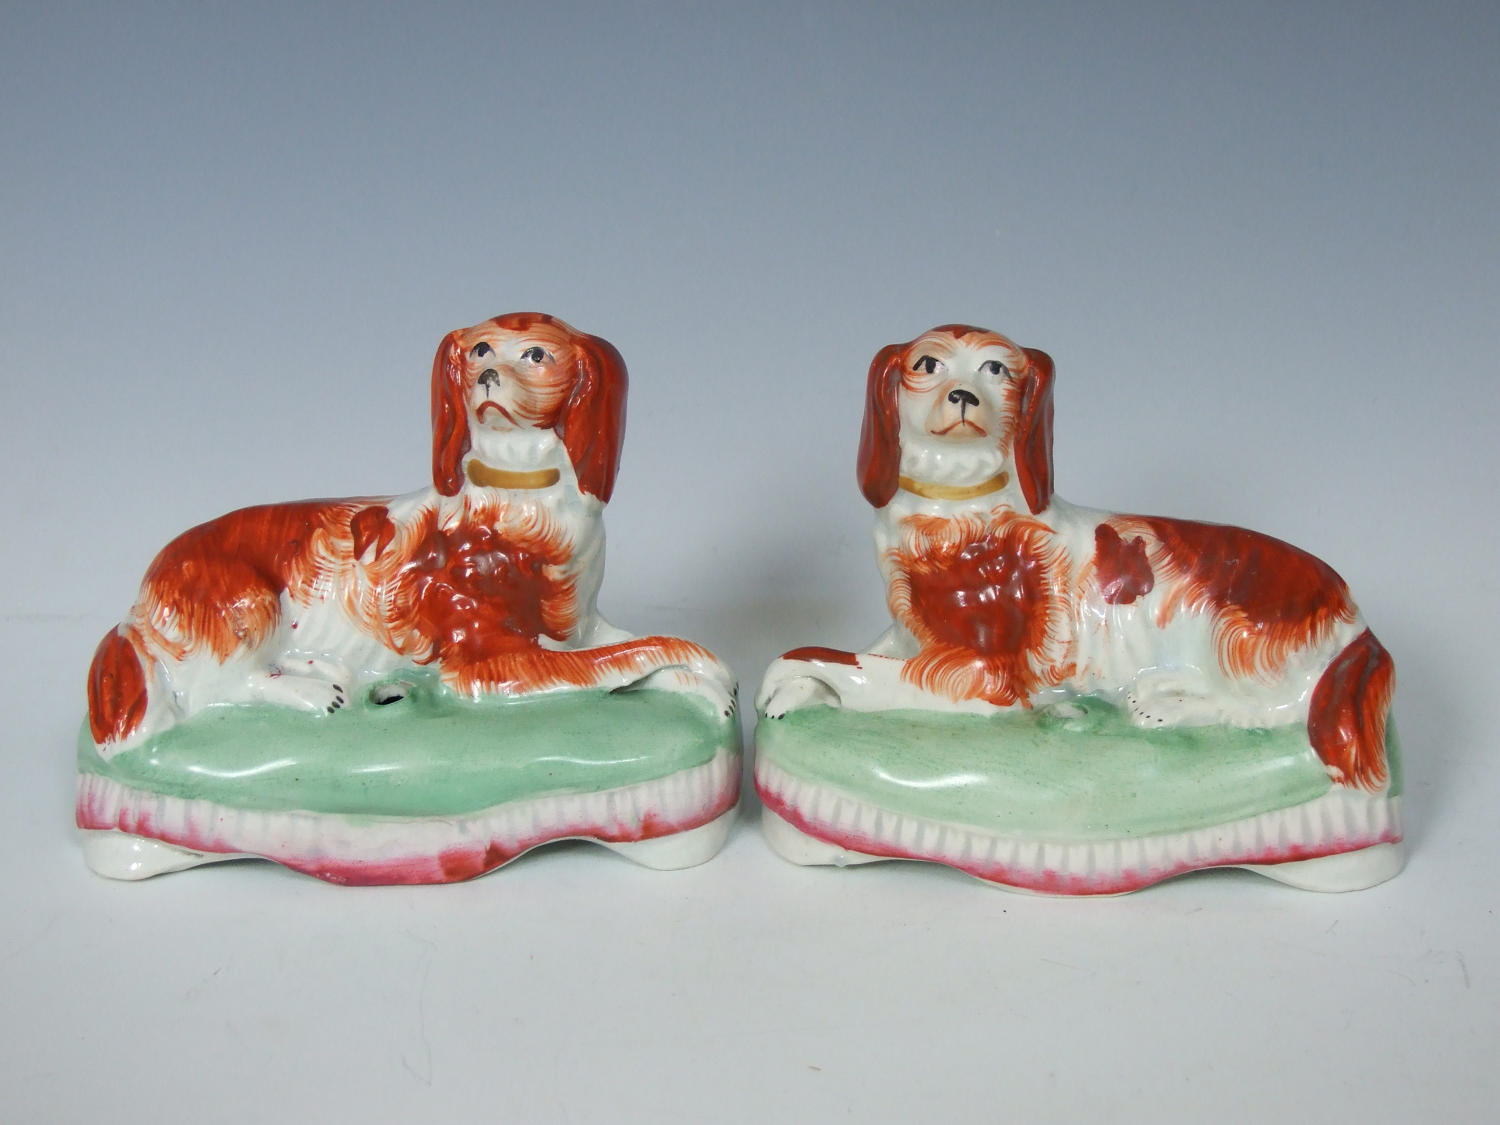 Pair of rare Staffordshire setters on cushions